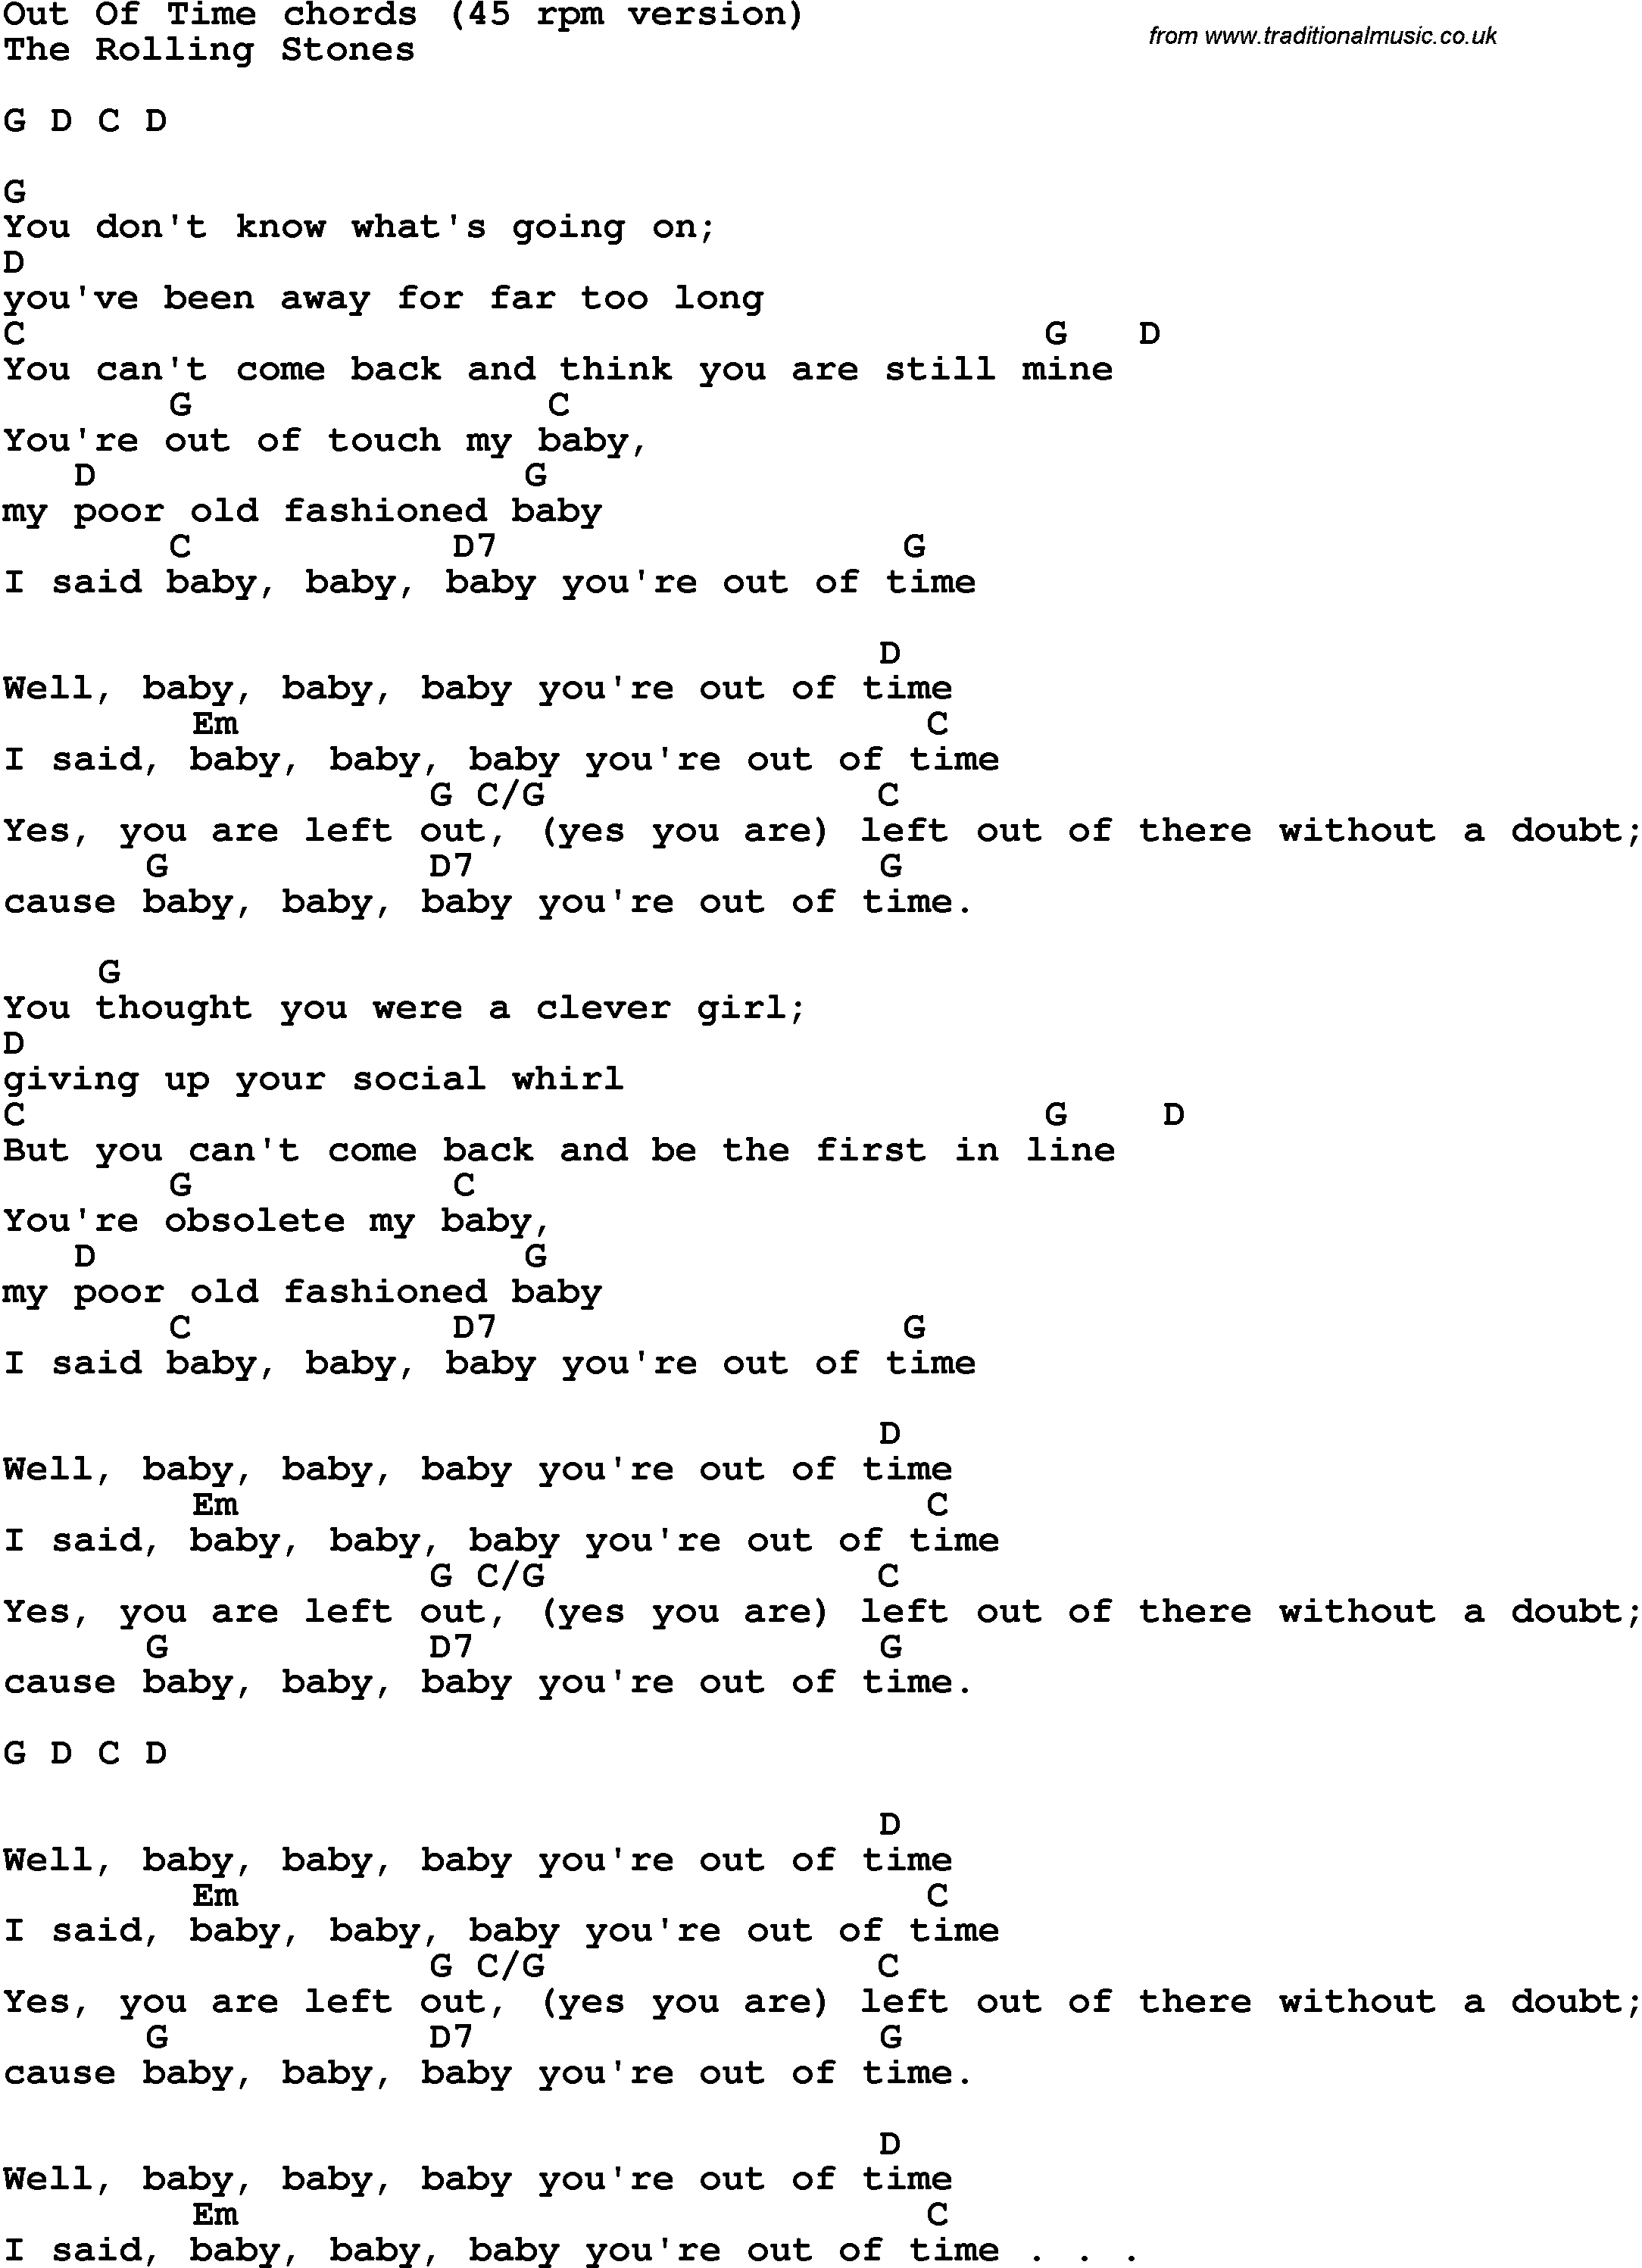 Song Lyrics with guitar chords for Out Of Time